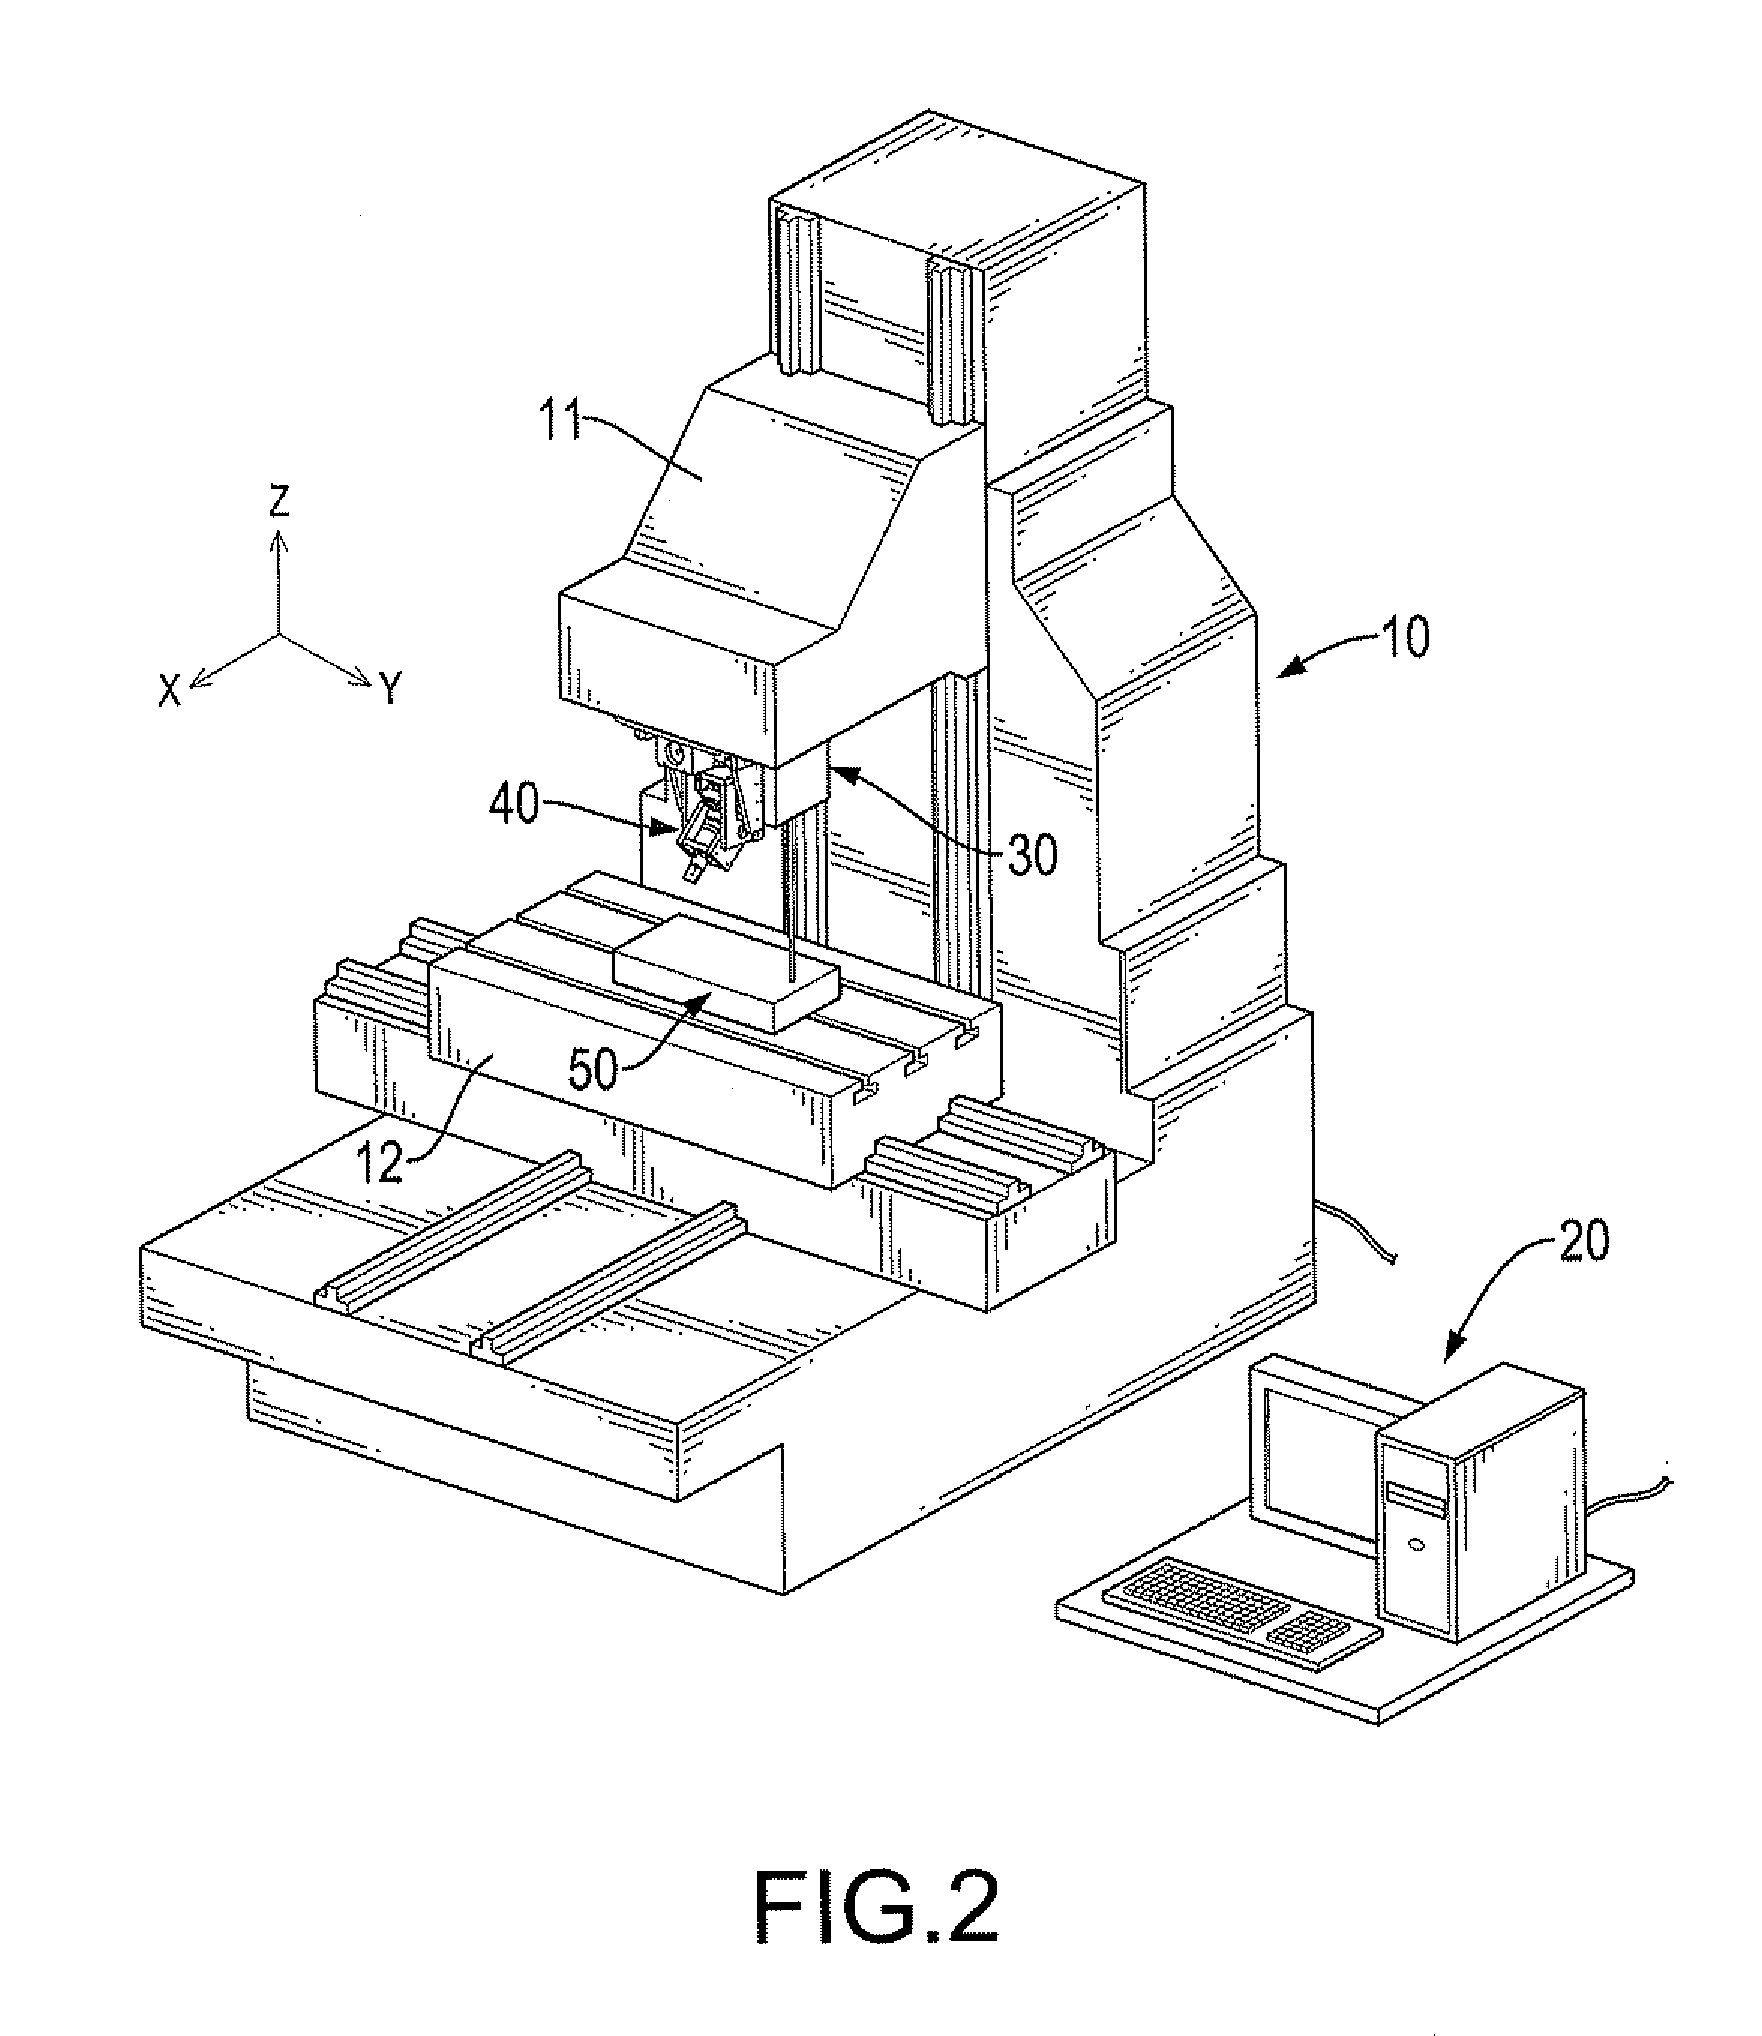 Method of numerical-control scraping of a work piece